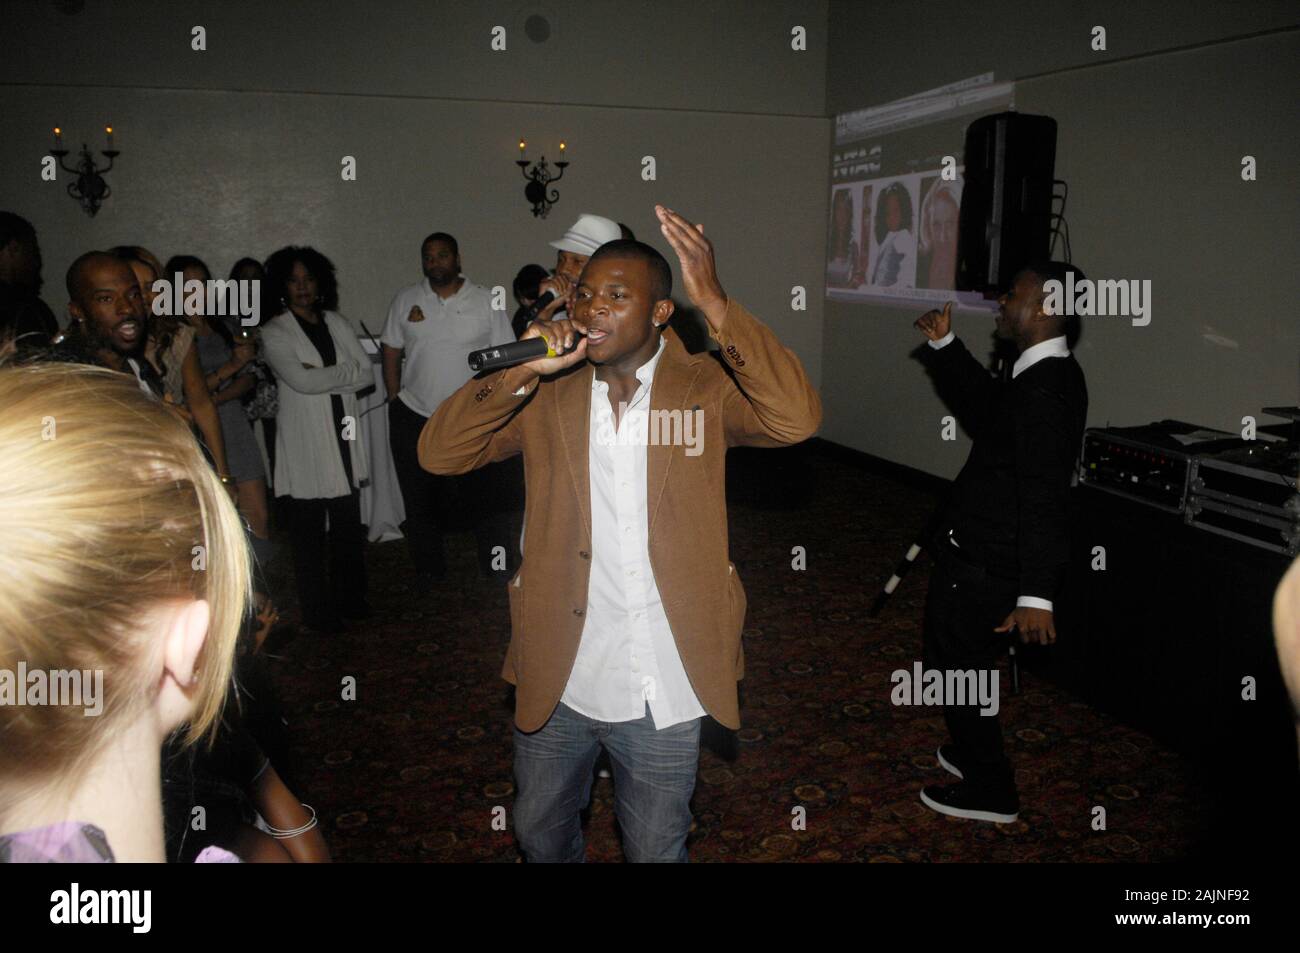 Rapper O.T. Genasis performs at the Norwood Talent Agency Corporation (NTAC) Grand Opening at the Hollywood Roosevelt Hotel on May 10, 2011 in Los Angeles. Stock Photo